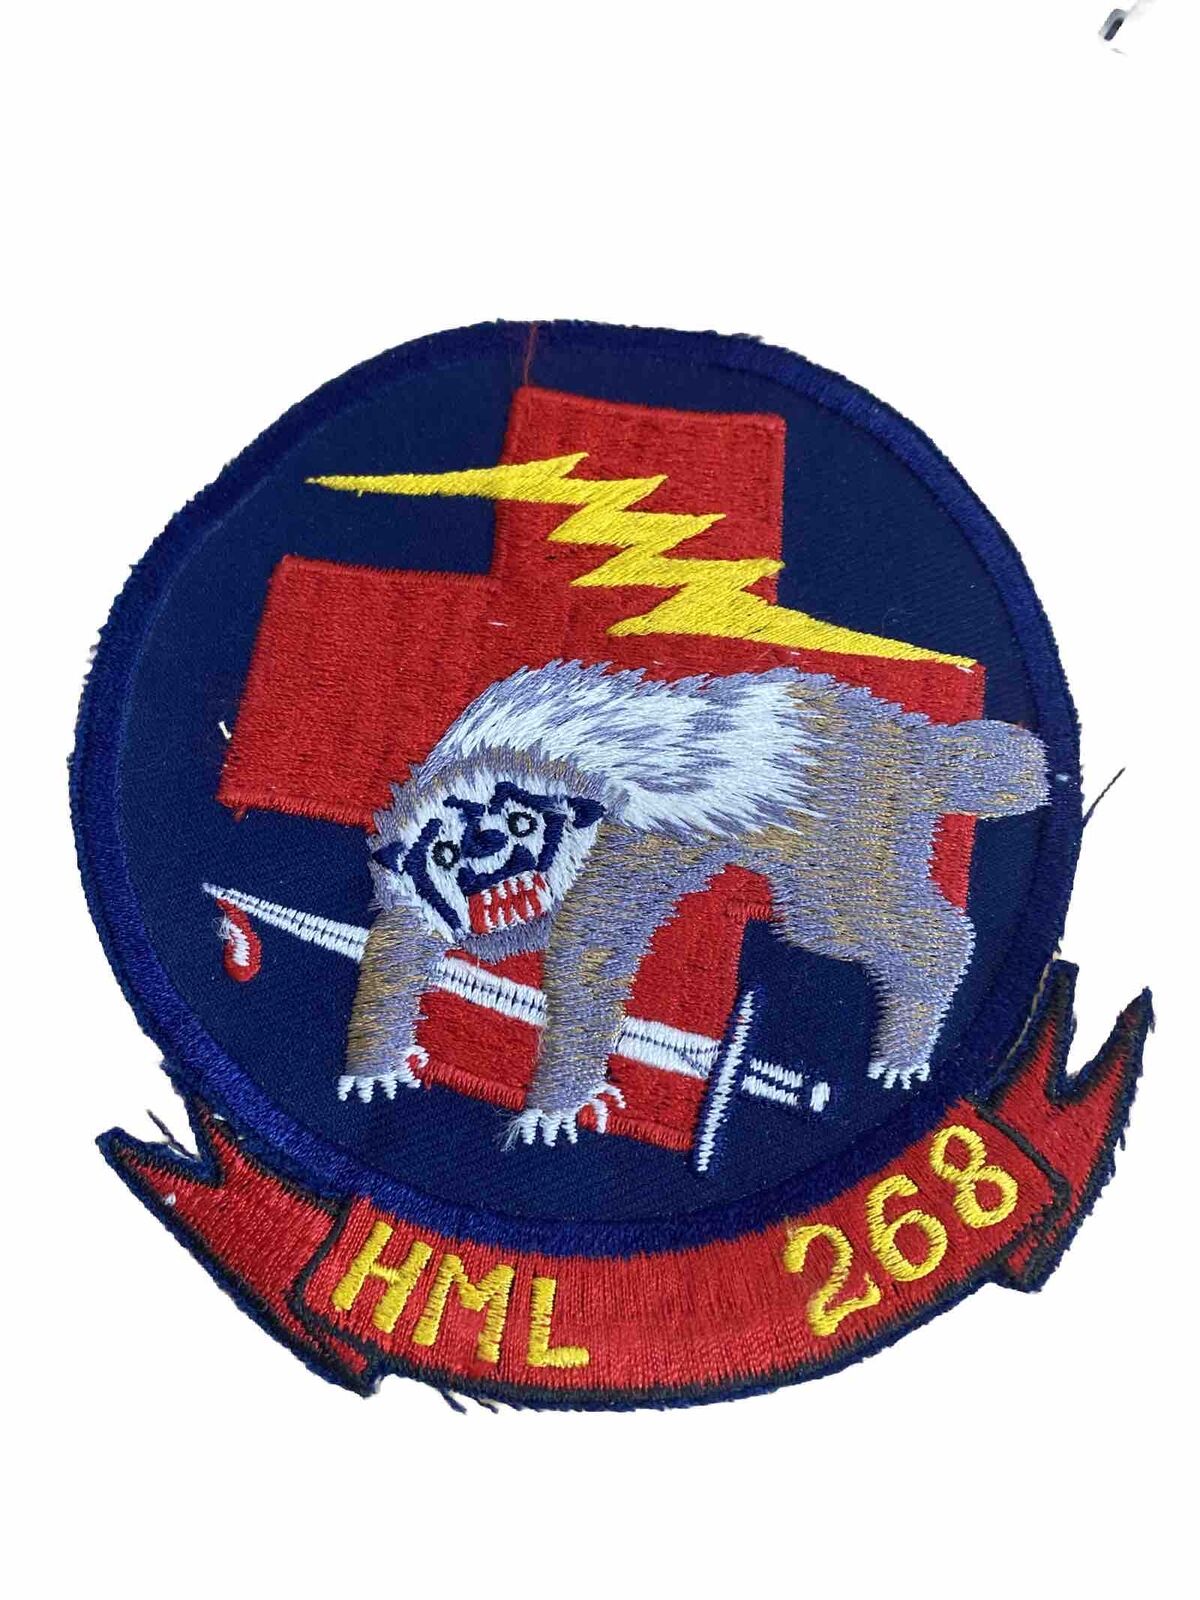 MARINE CORPS HML 268 HELICOPTER SQUADRON EMBROIDERED JACKET PATCH 5”